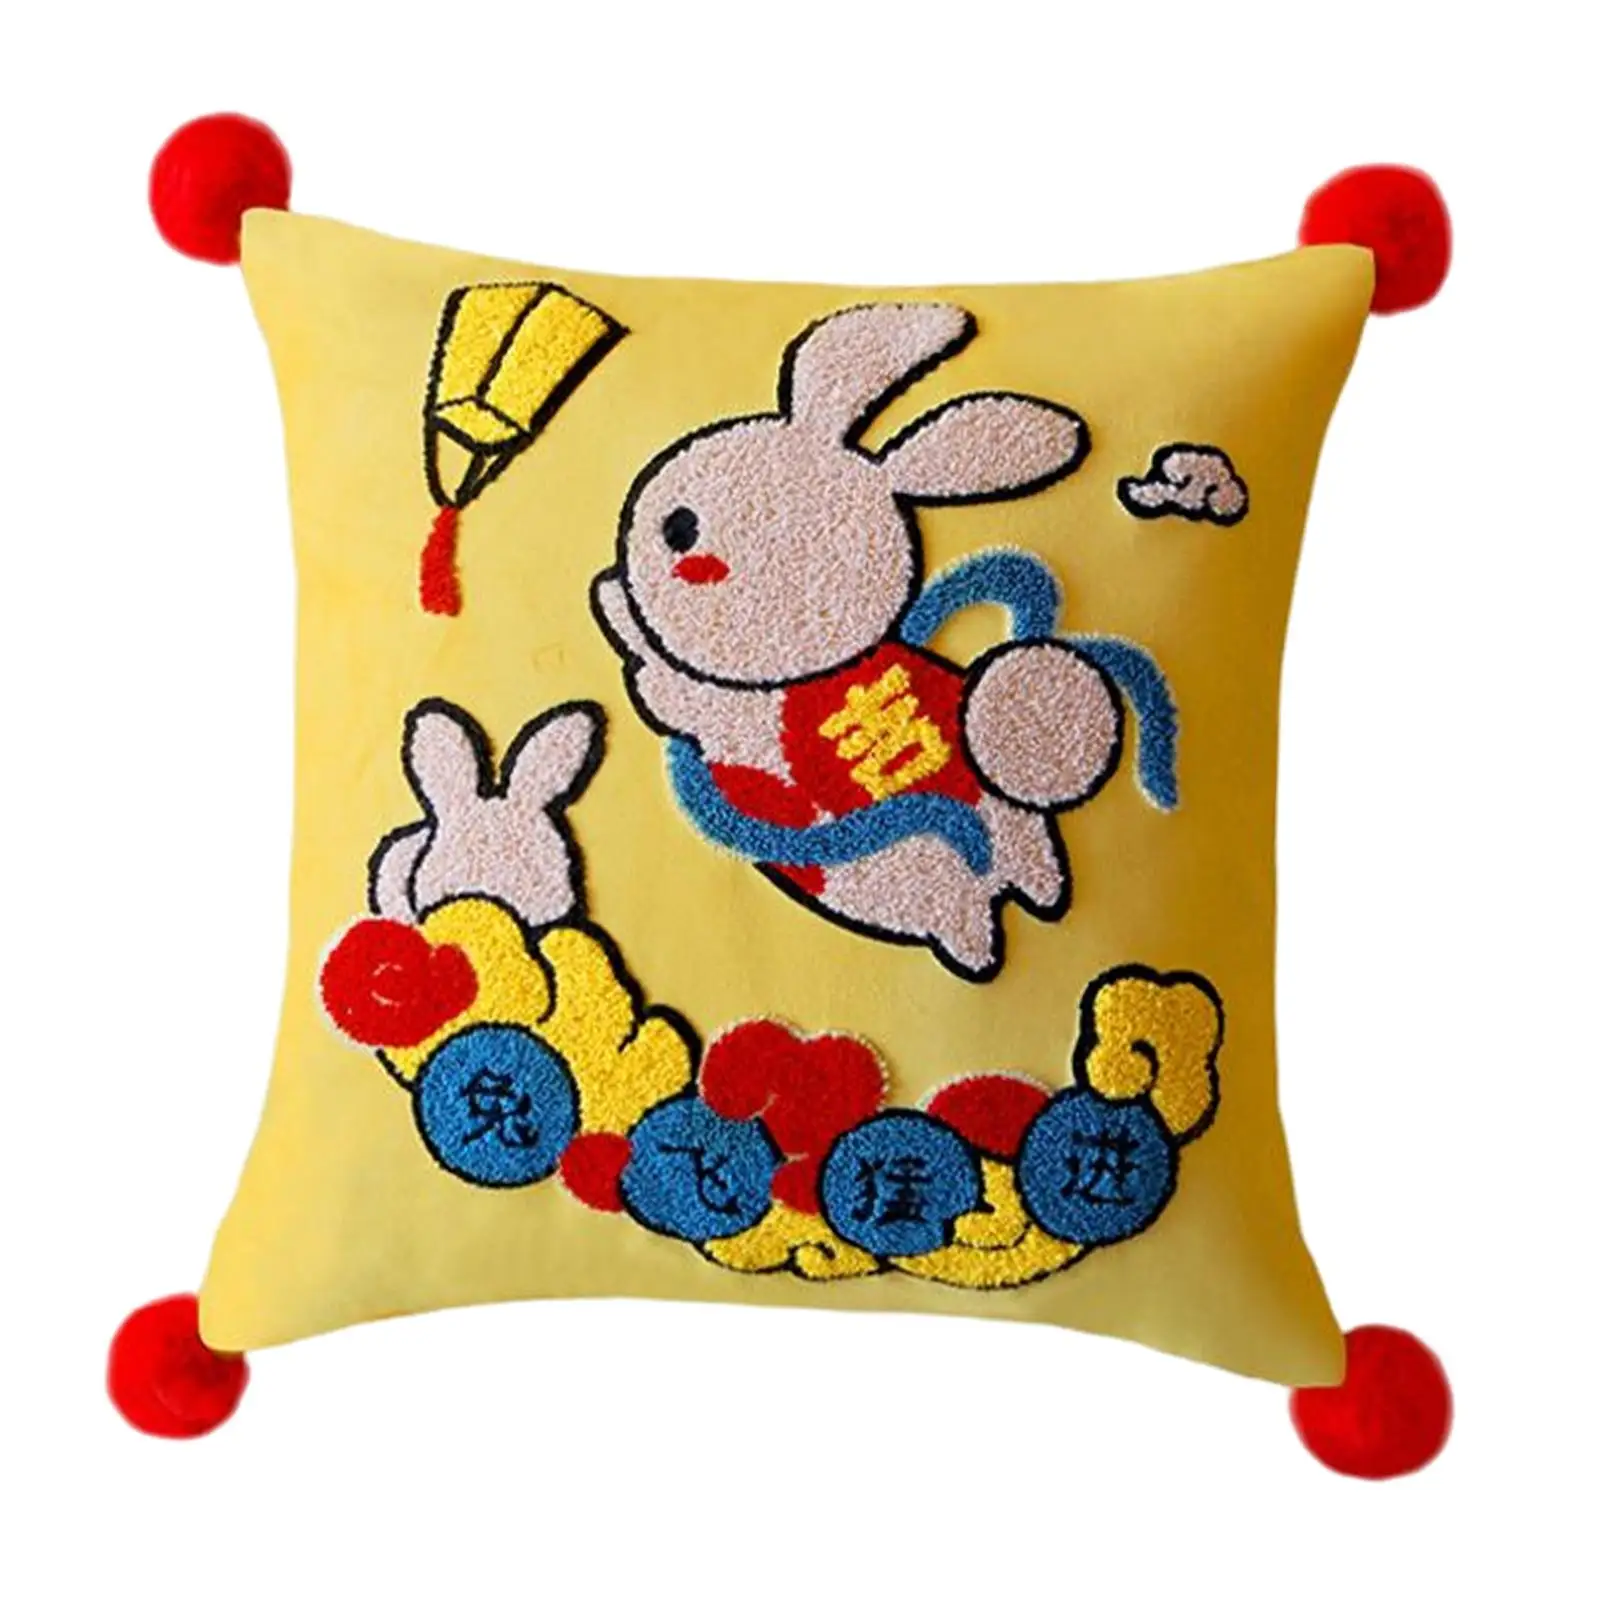 Chinese New Year Pillow Case Decorative Throw Pillow Cover Pillowcase Embroidery Cushion Cover for Living Room Car Sofa Decor